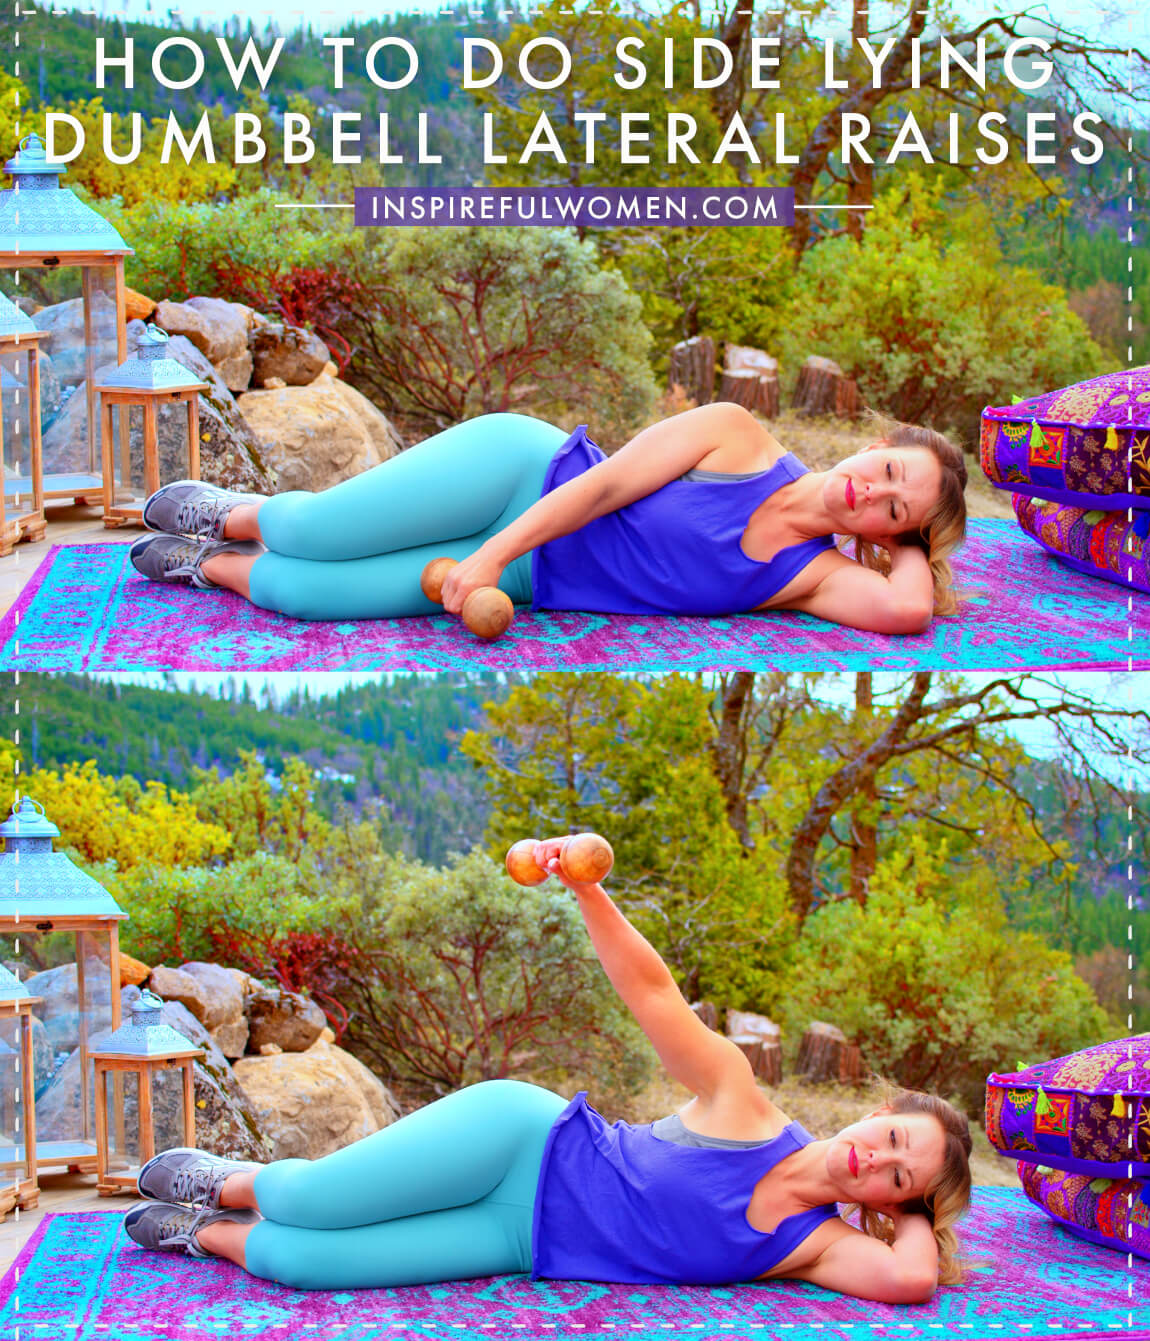 how-to-do-side-lying-dumbbell-lateral-raise-deltoid-exercise-at-home-women-over-40